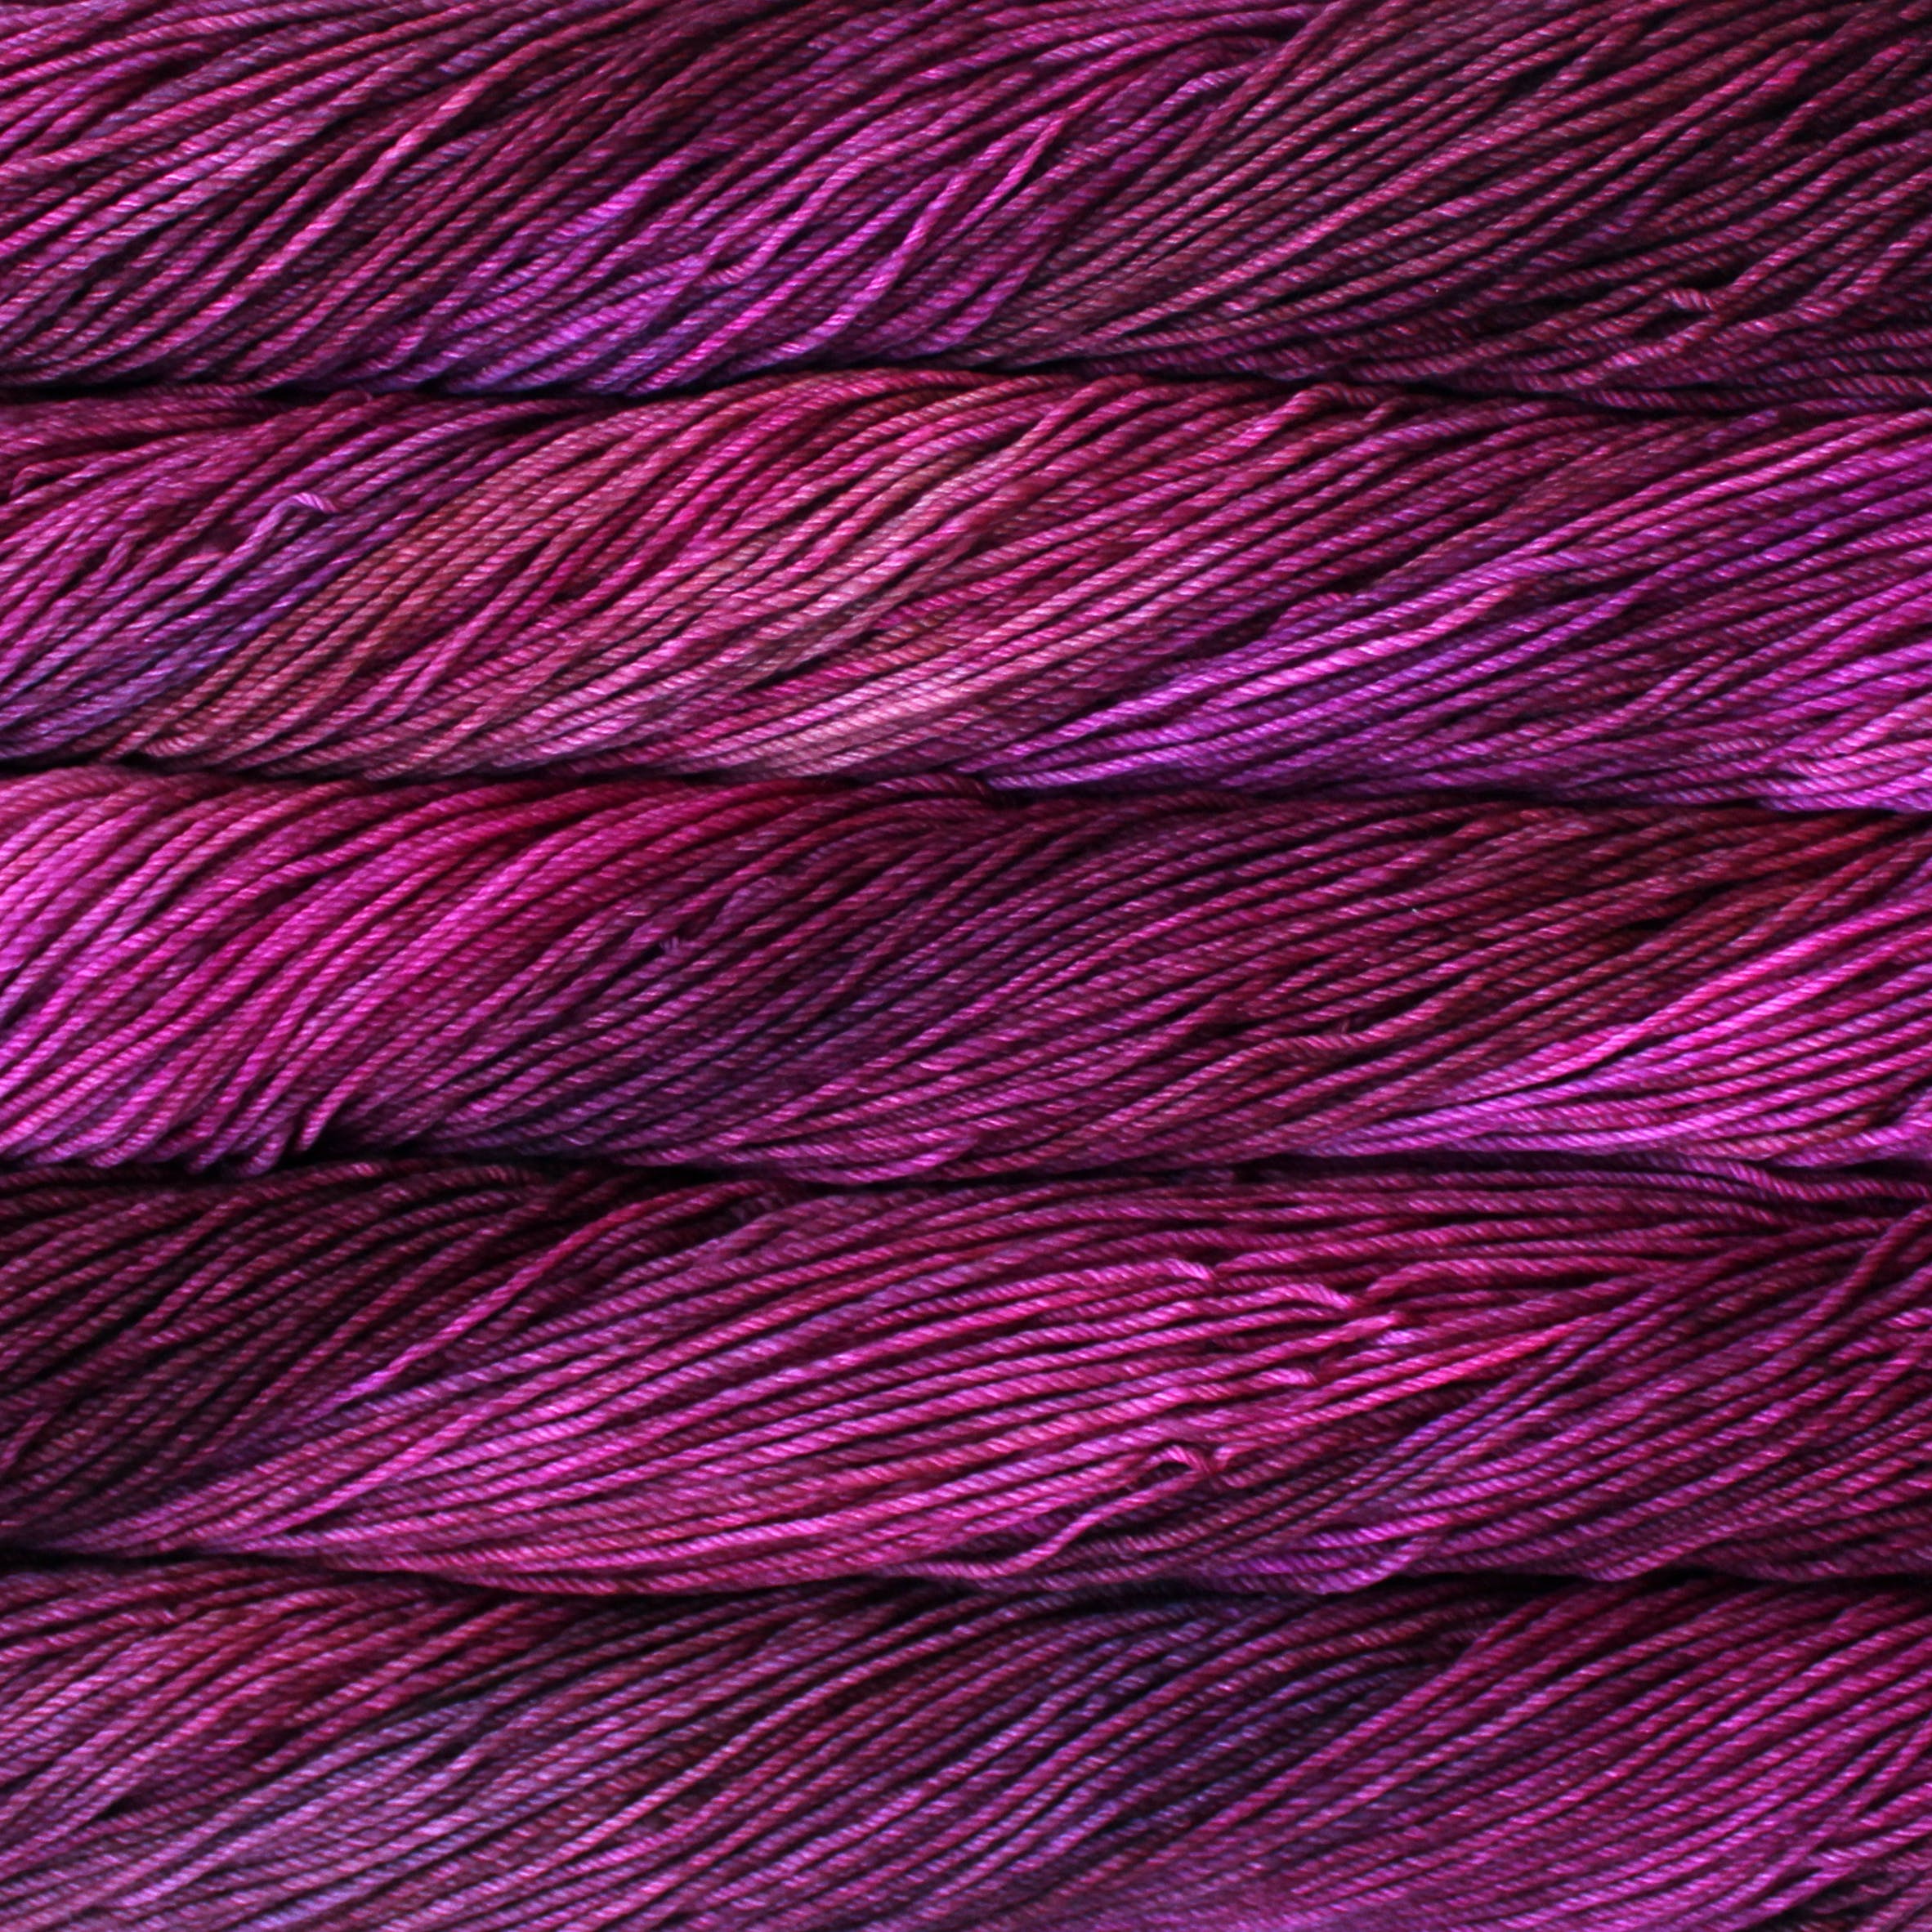 Skein of Malabrigo Rios Worsted weight yarn in the color Magenta (Pink) for knitting and crocheting.